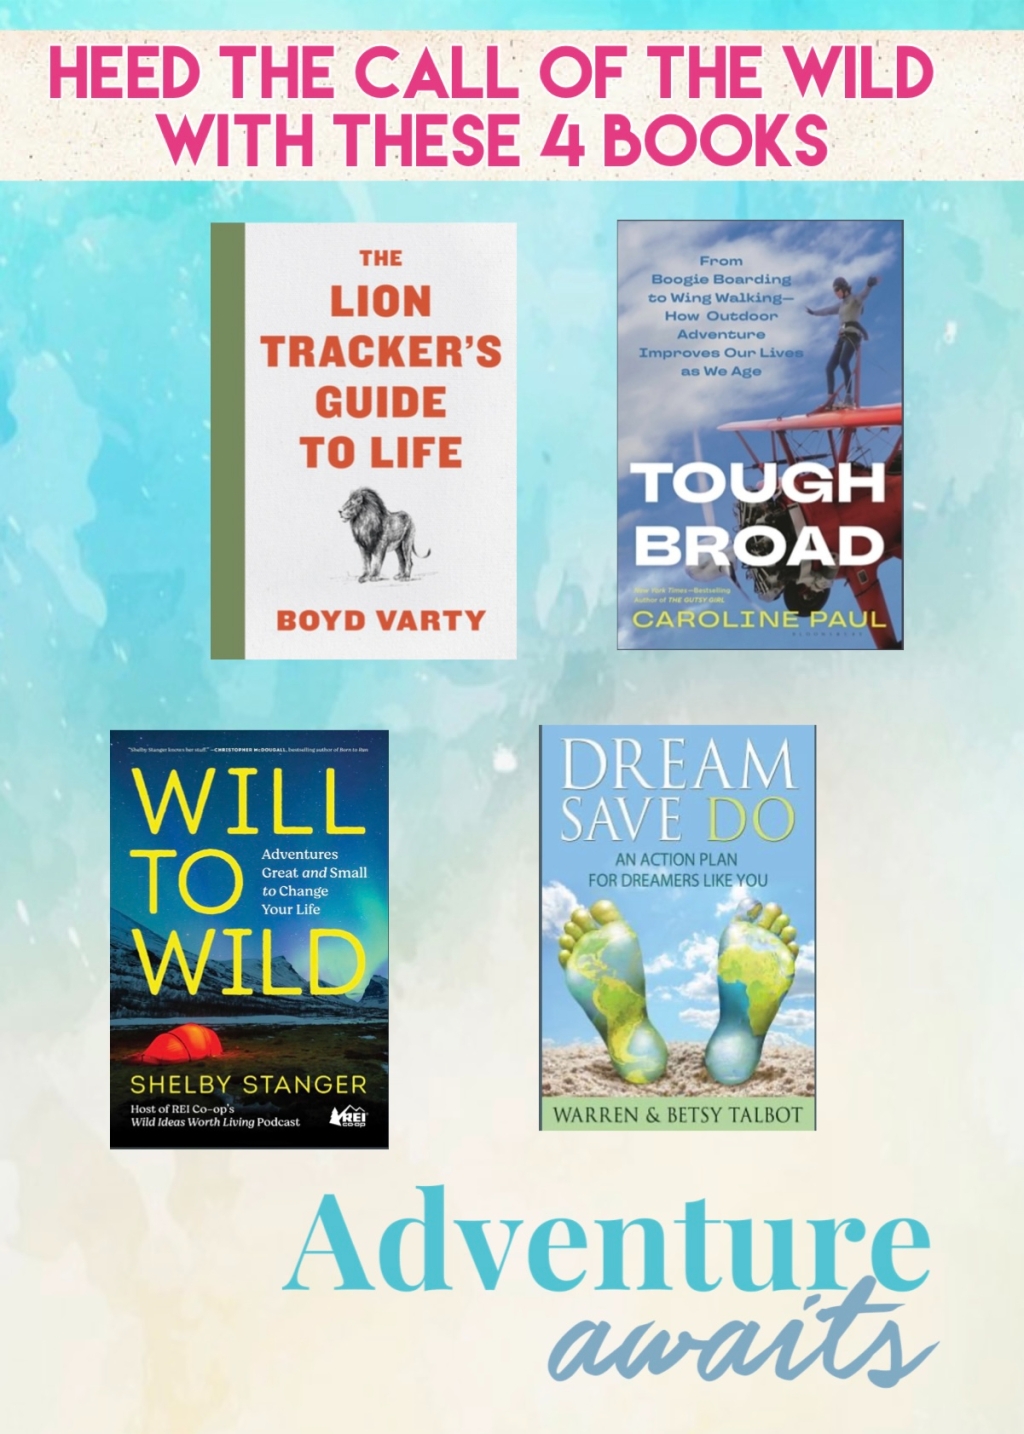 Dream BIG and say yes to adventure with these 4 books.